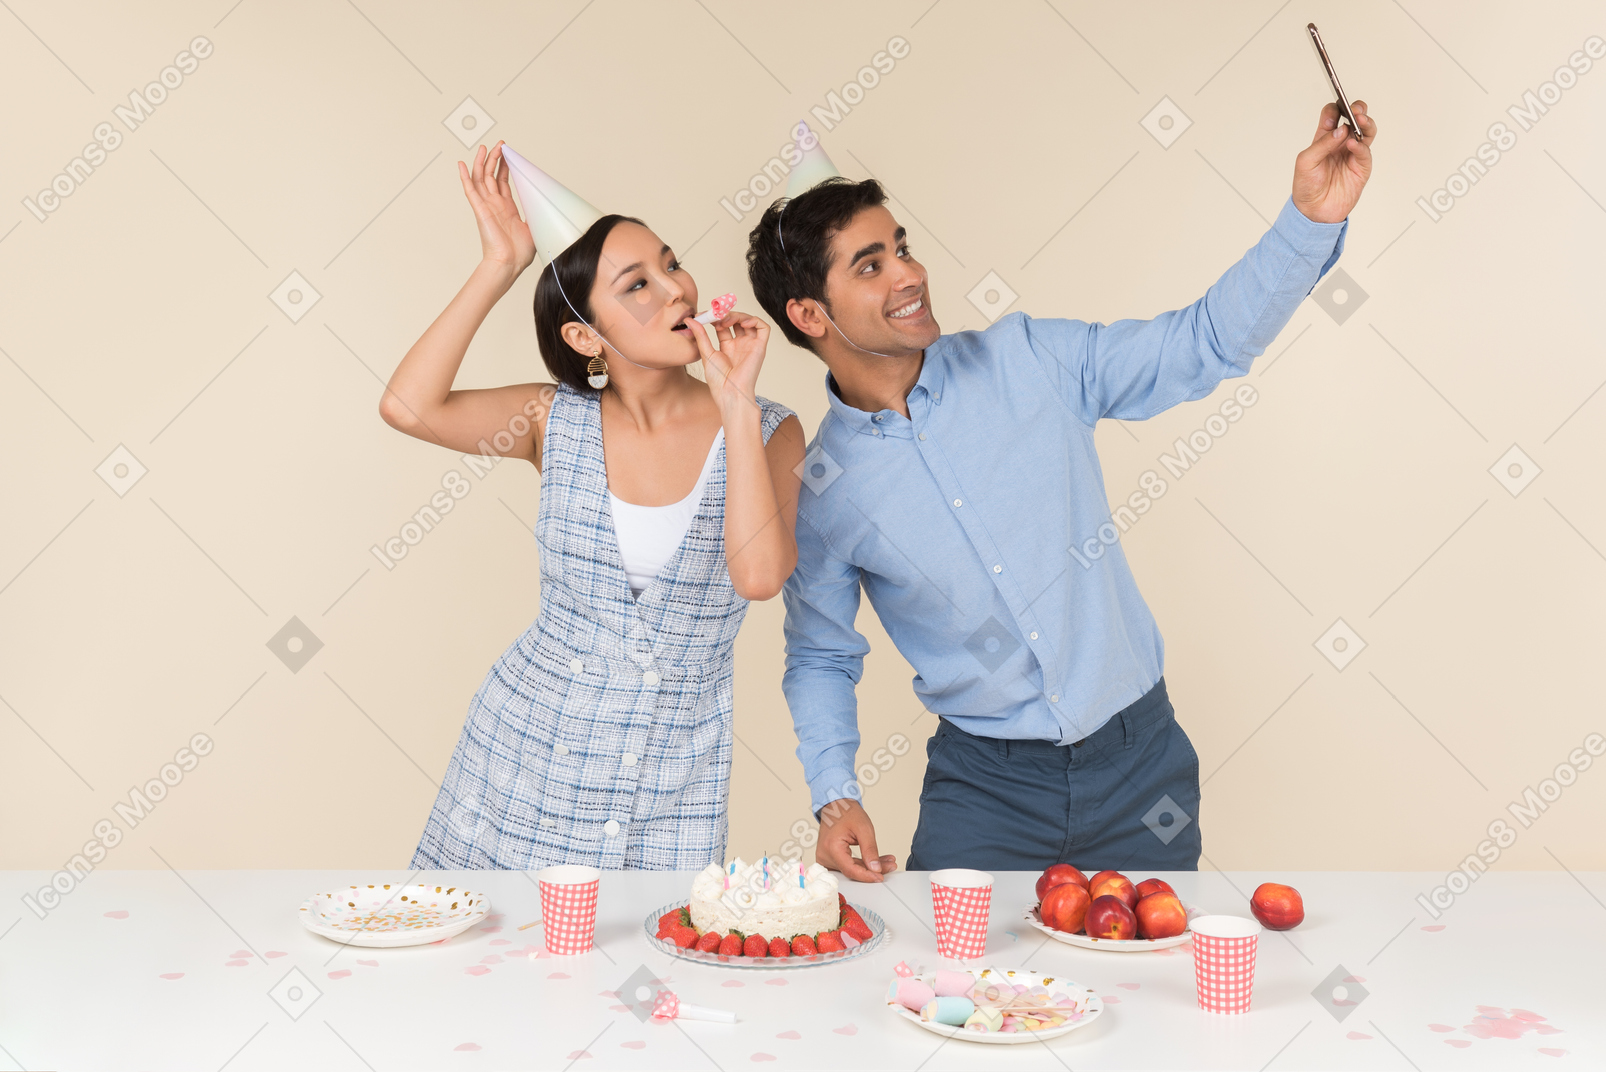 Young interracial couple making a selfie while celebrating birthday